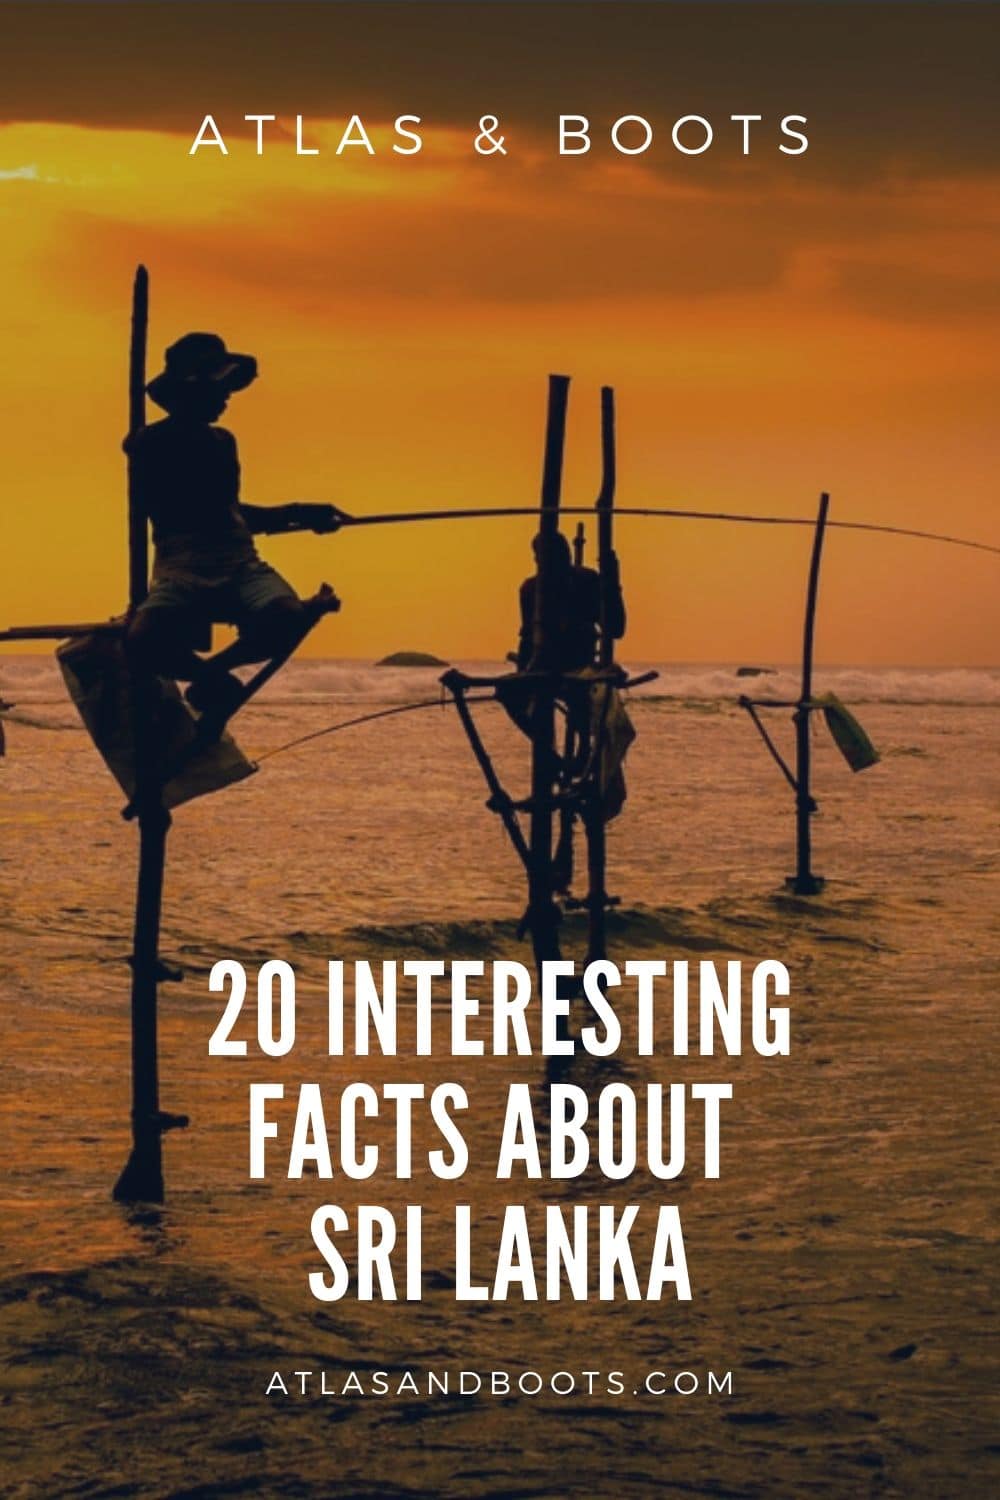 22 Interesting Facts About Sri Lanka Atlas And Boots